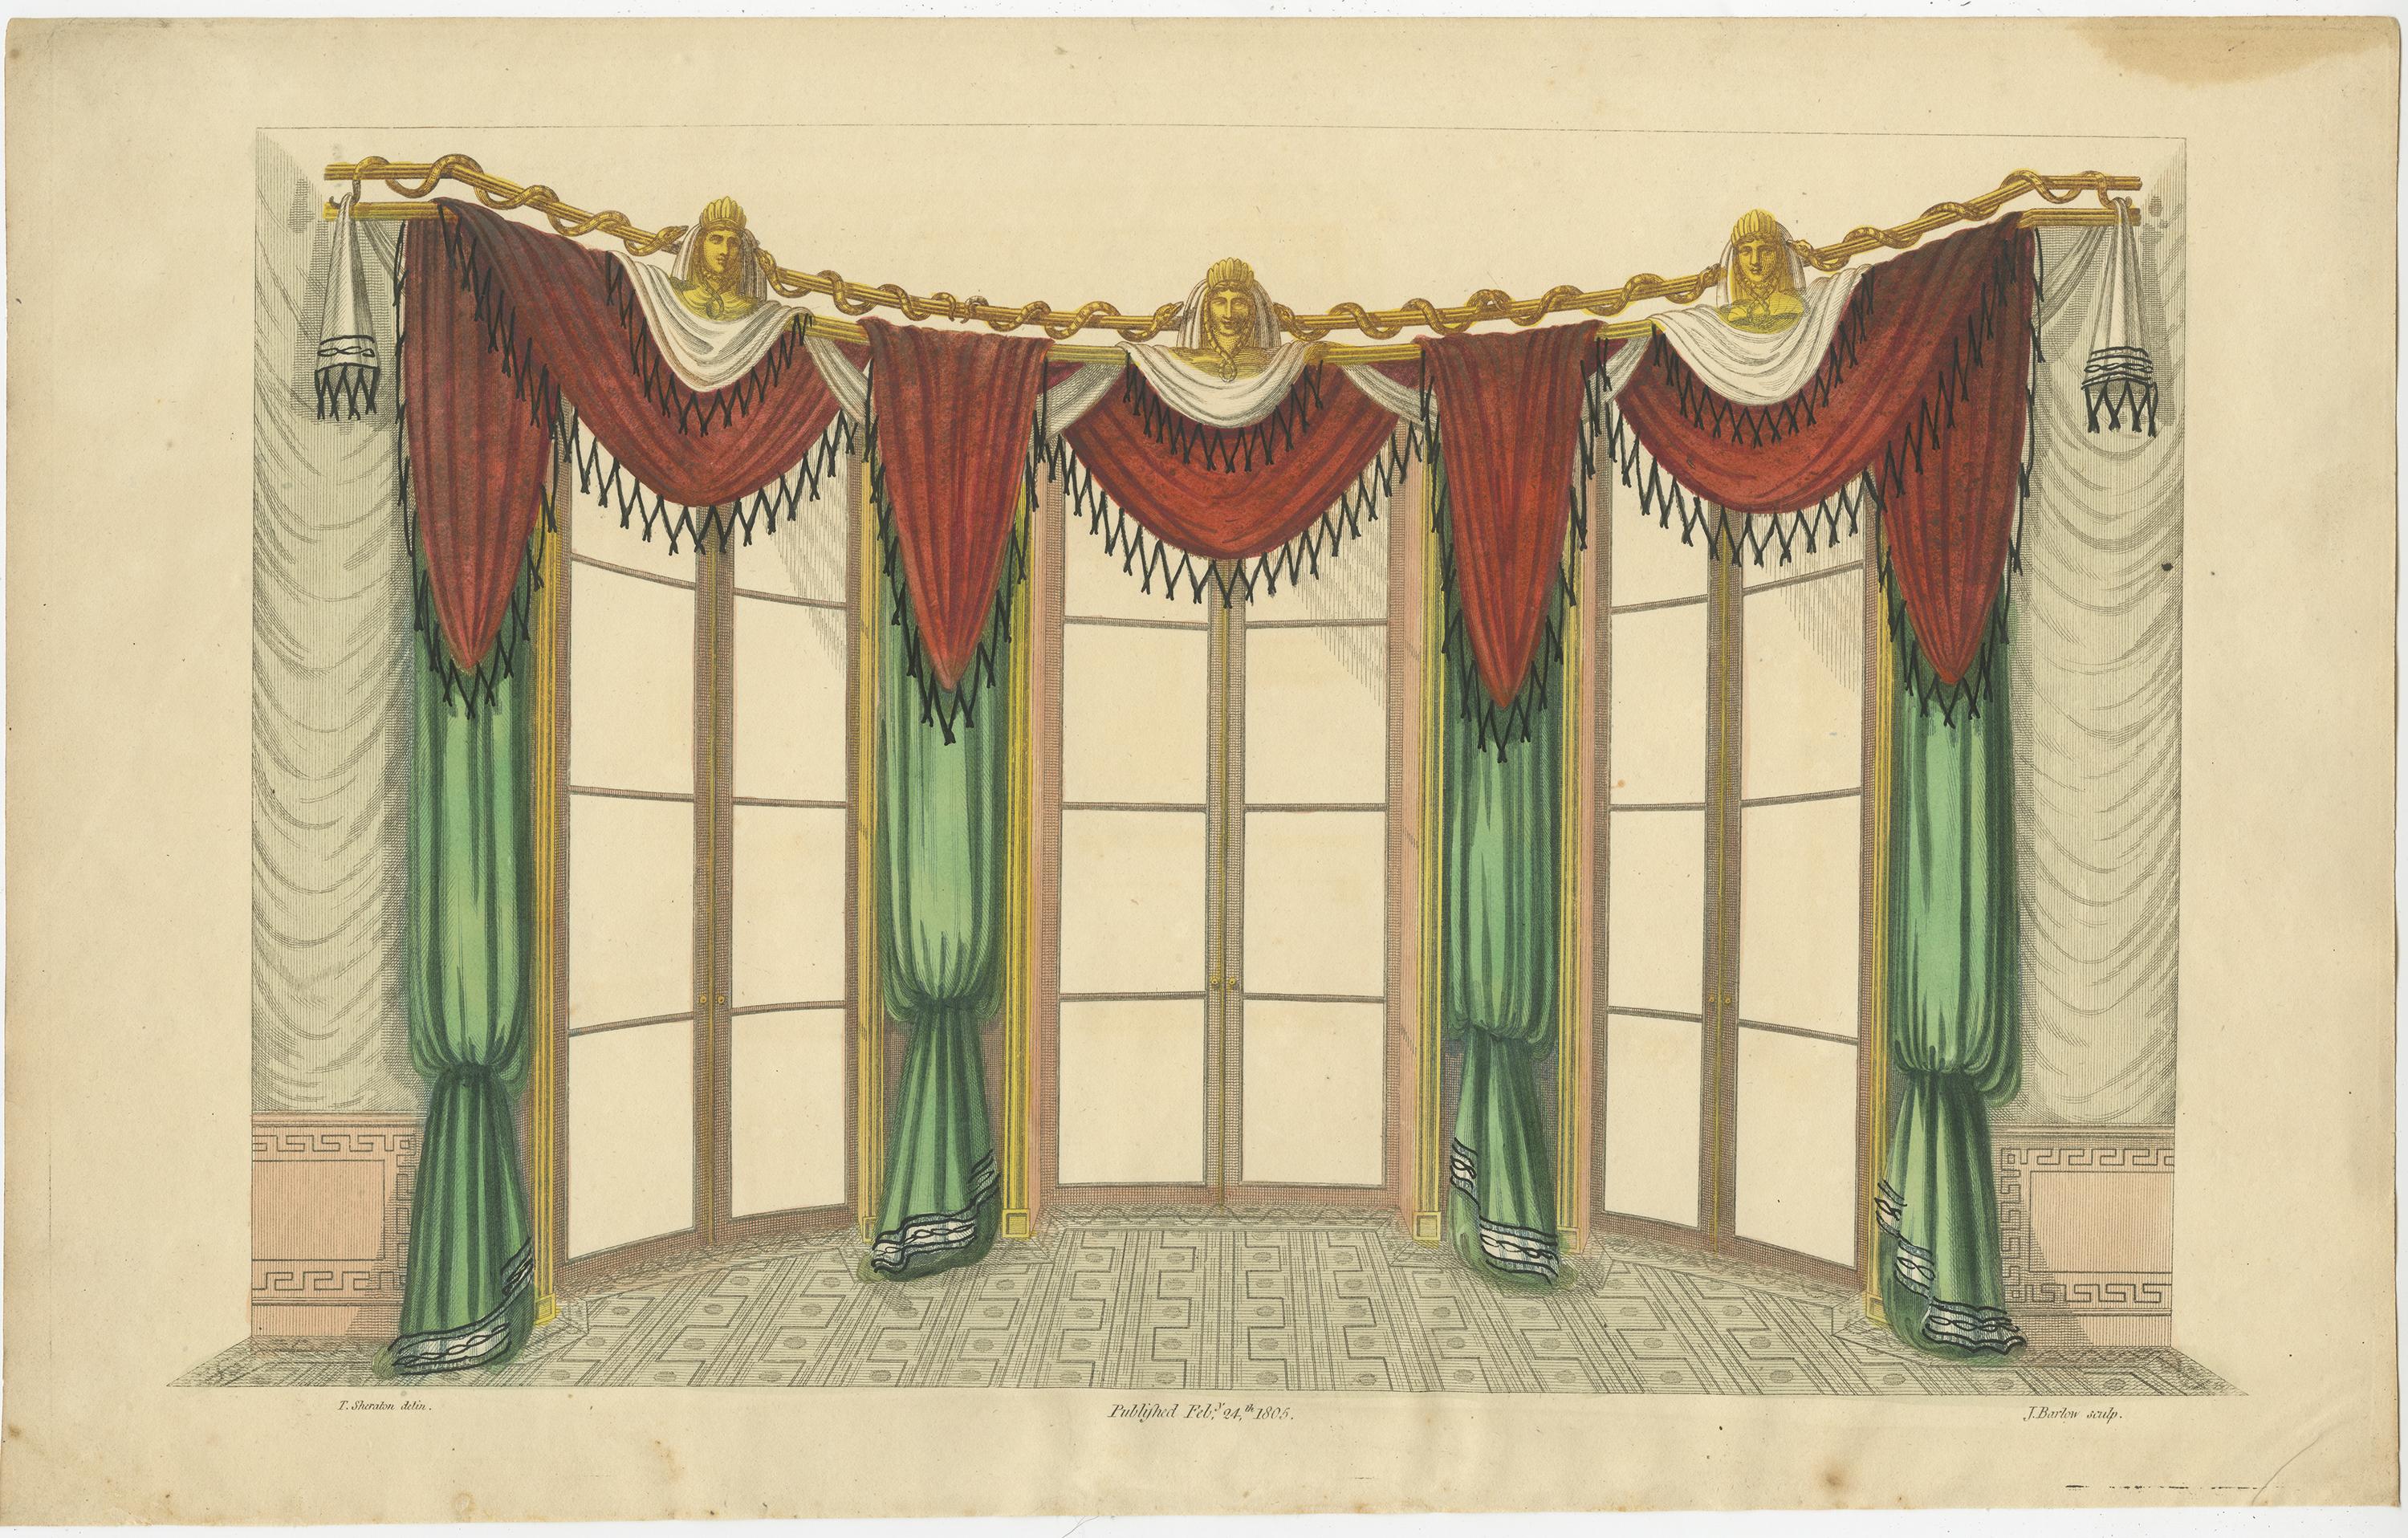 Set of two antique prints of windows and drapery. These prints originate from 'The General Artist's Encyclopaedia' by Thomas Sheraton. Published 1803-1805.